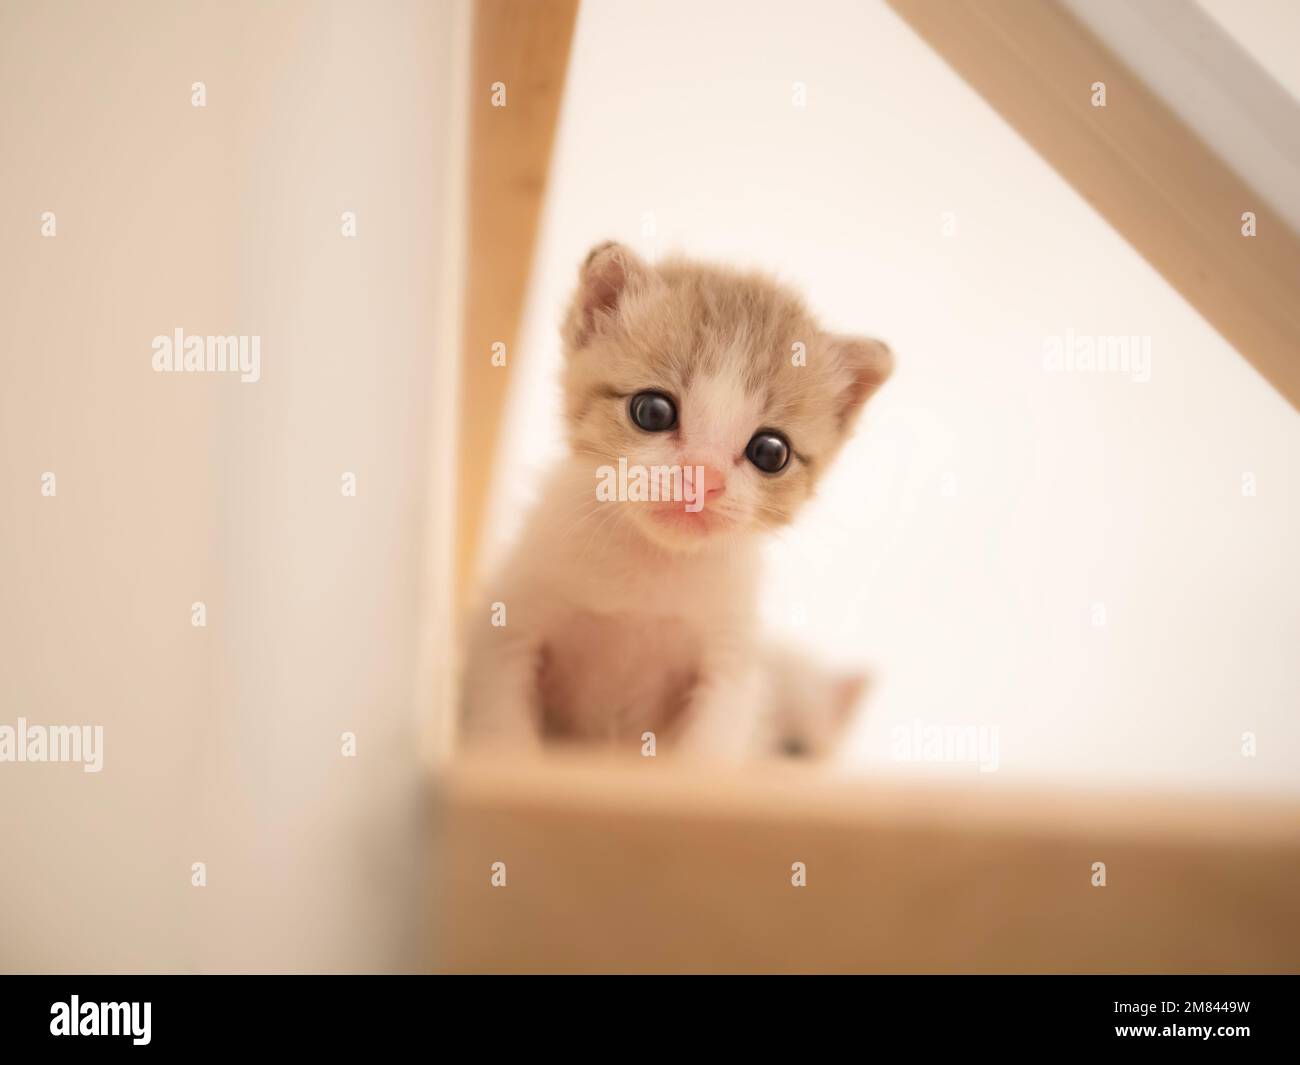 A serious kitten looks down from the stairs with curiosity. Stock Photo